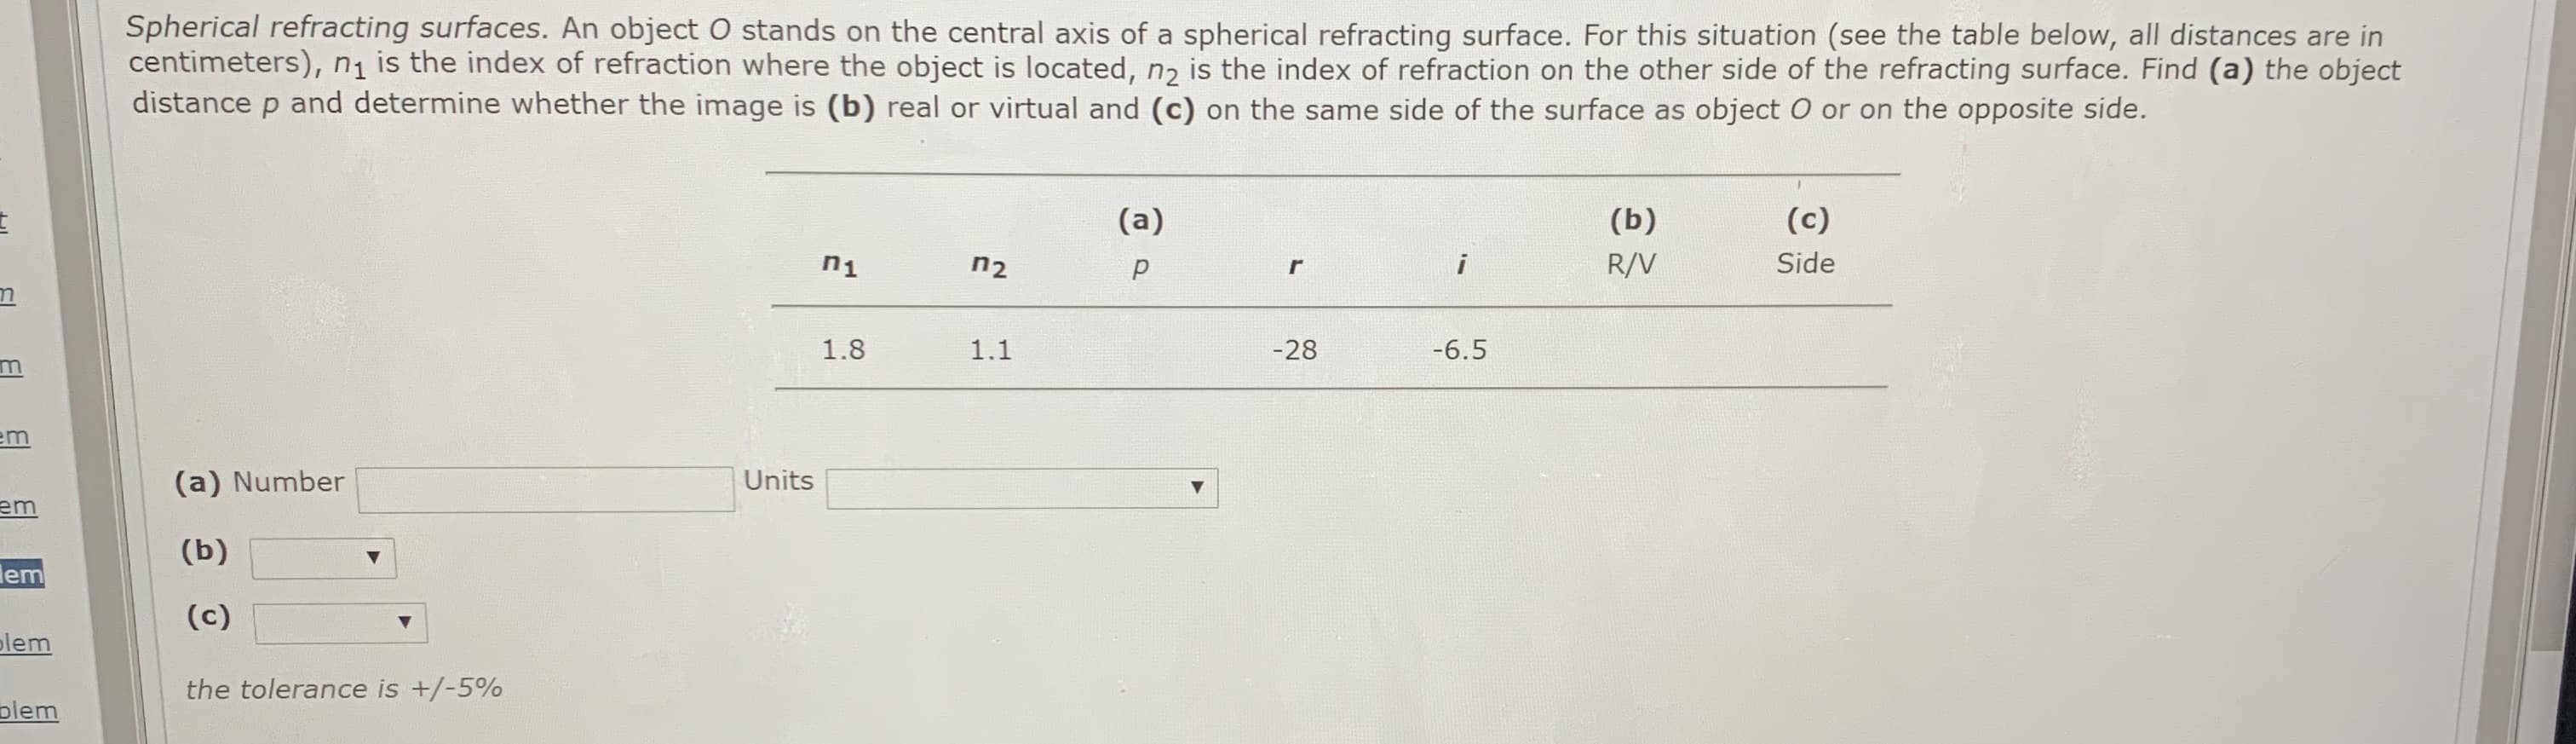 Spherical refracting surfaces. An object O stands on the central axis of a spherical refracting surface. For this situation (see the table below, all distances are in
centimeters), n1 is the index of refraction where the object is located, nɔ is the index of refraction on the other side of the refracting surface. Find (a) the object
distance p and determine whether the image is (b) real or virtual and (c) on the same side of the surface as object O or on the opposite side.
(a)
(b)
(c)
n1
n2
R/V
Side
1.8
1.1
-28
-6.5
em
(a) Number
Units
em
(b)
lem
(c)
lem
the tolerance is +/-5%
plem
